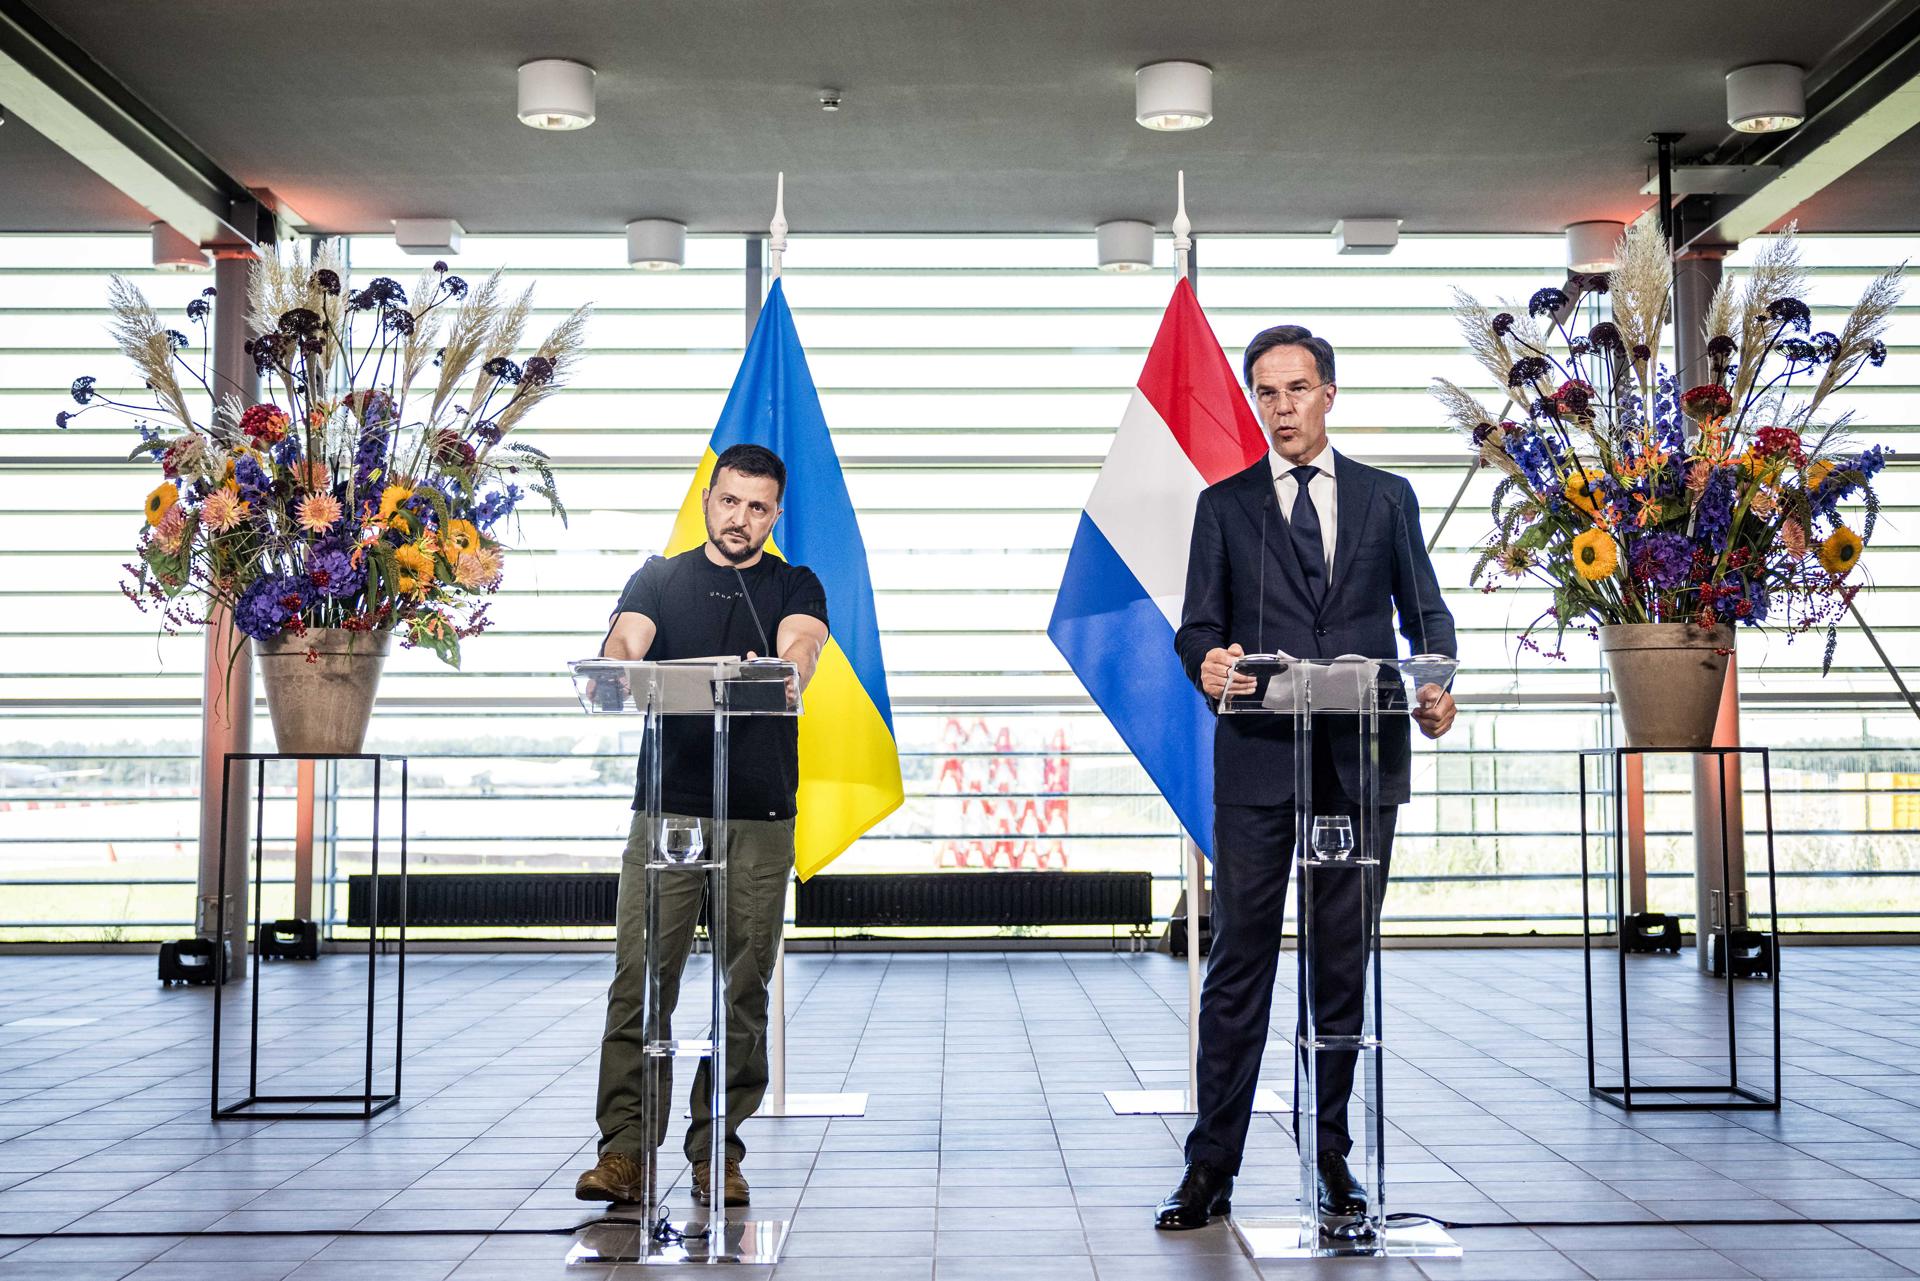 Ukrainian President Volodymyr Zelenskyy (L) and Dutch Prime Minister Mark Rutte give a press conference during a visit to Eindhoven Air Base, Eindhoven, the Netherlands, 20 August 2023. EFE/EPA/ROB ENGELAAR
